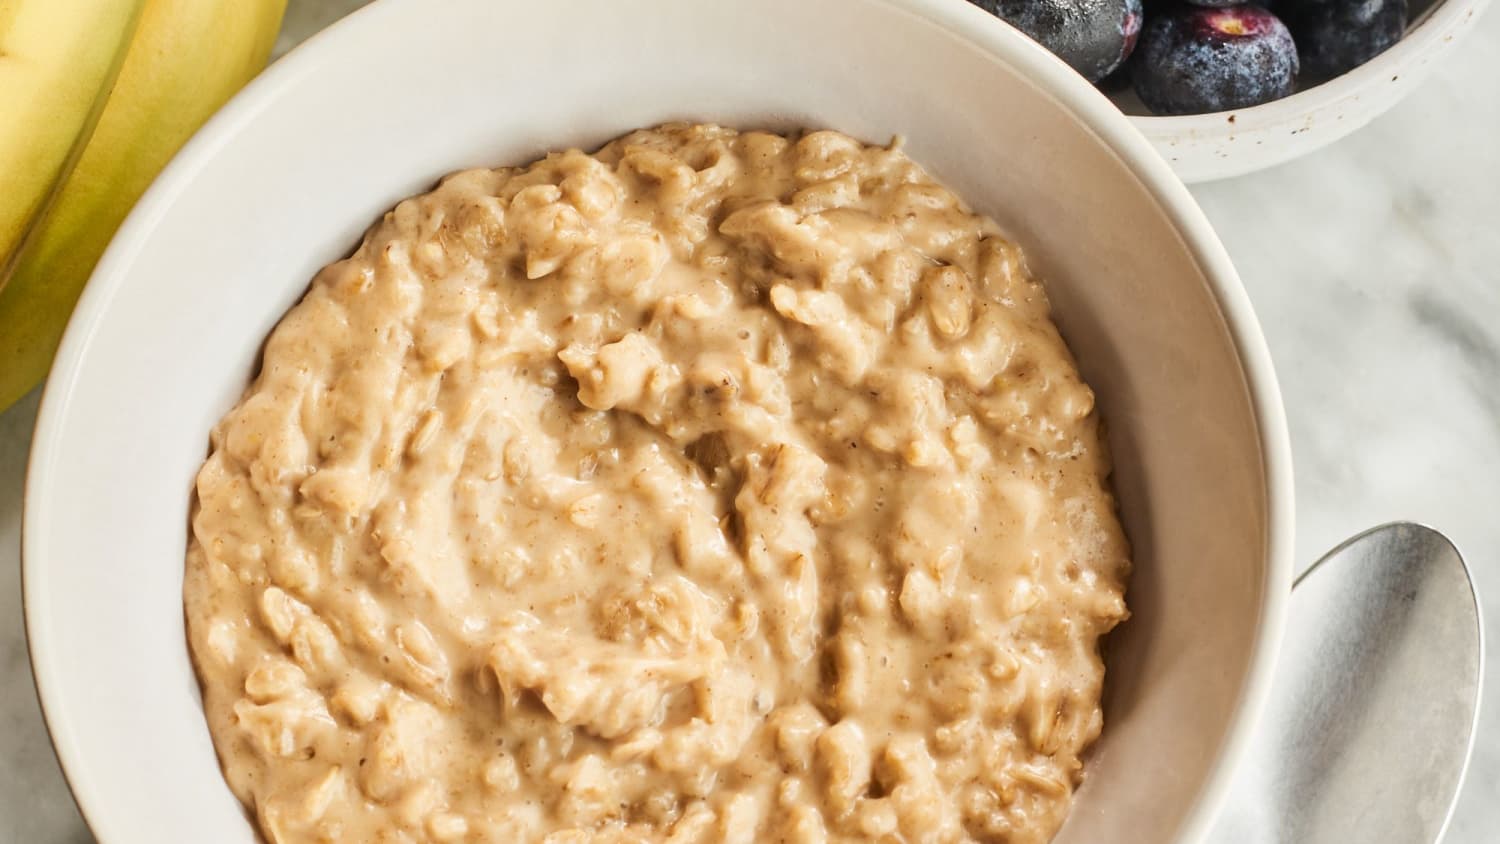 Toasted Oats Are the Best Oatmeal Cooking Hack